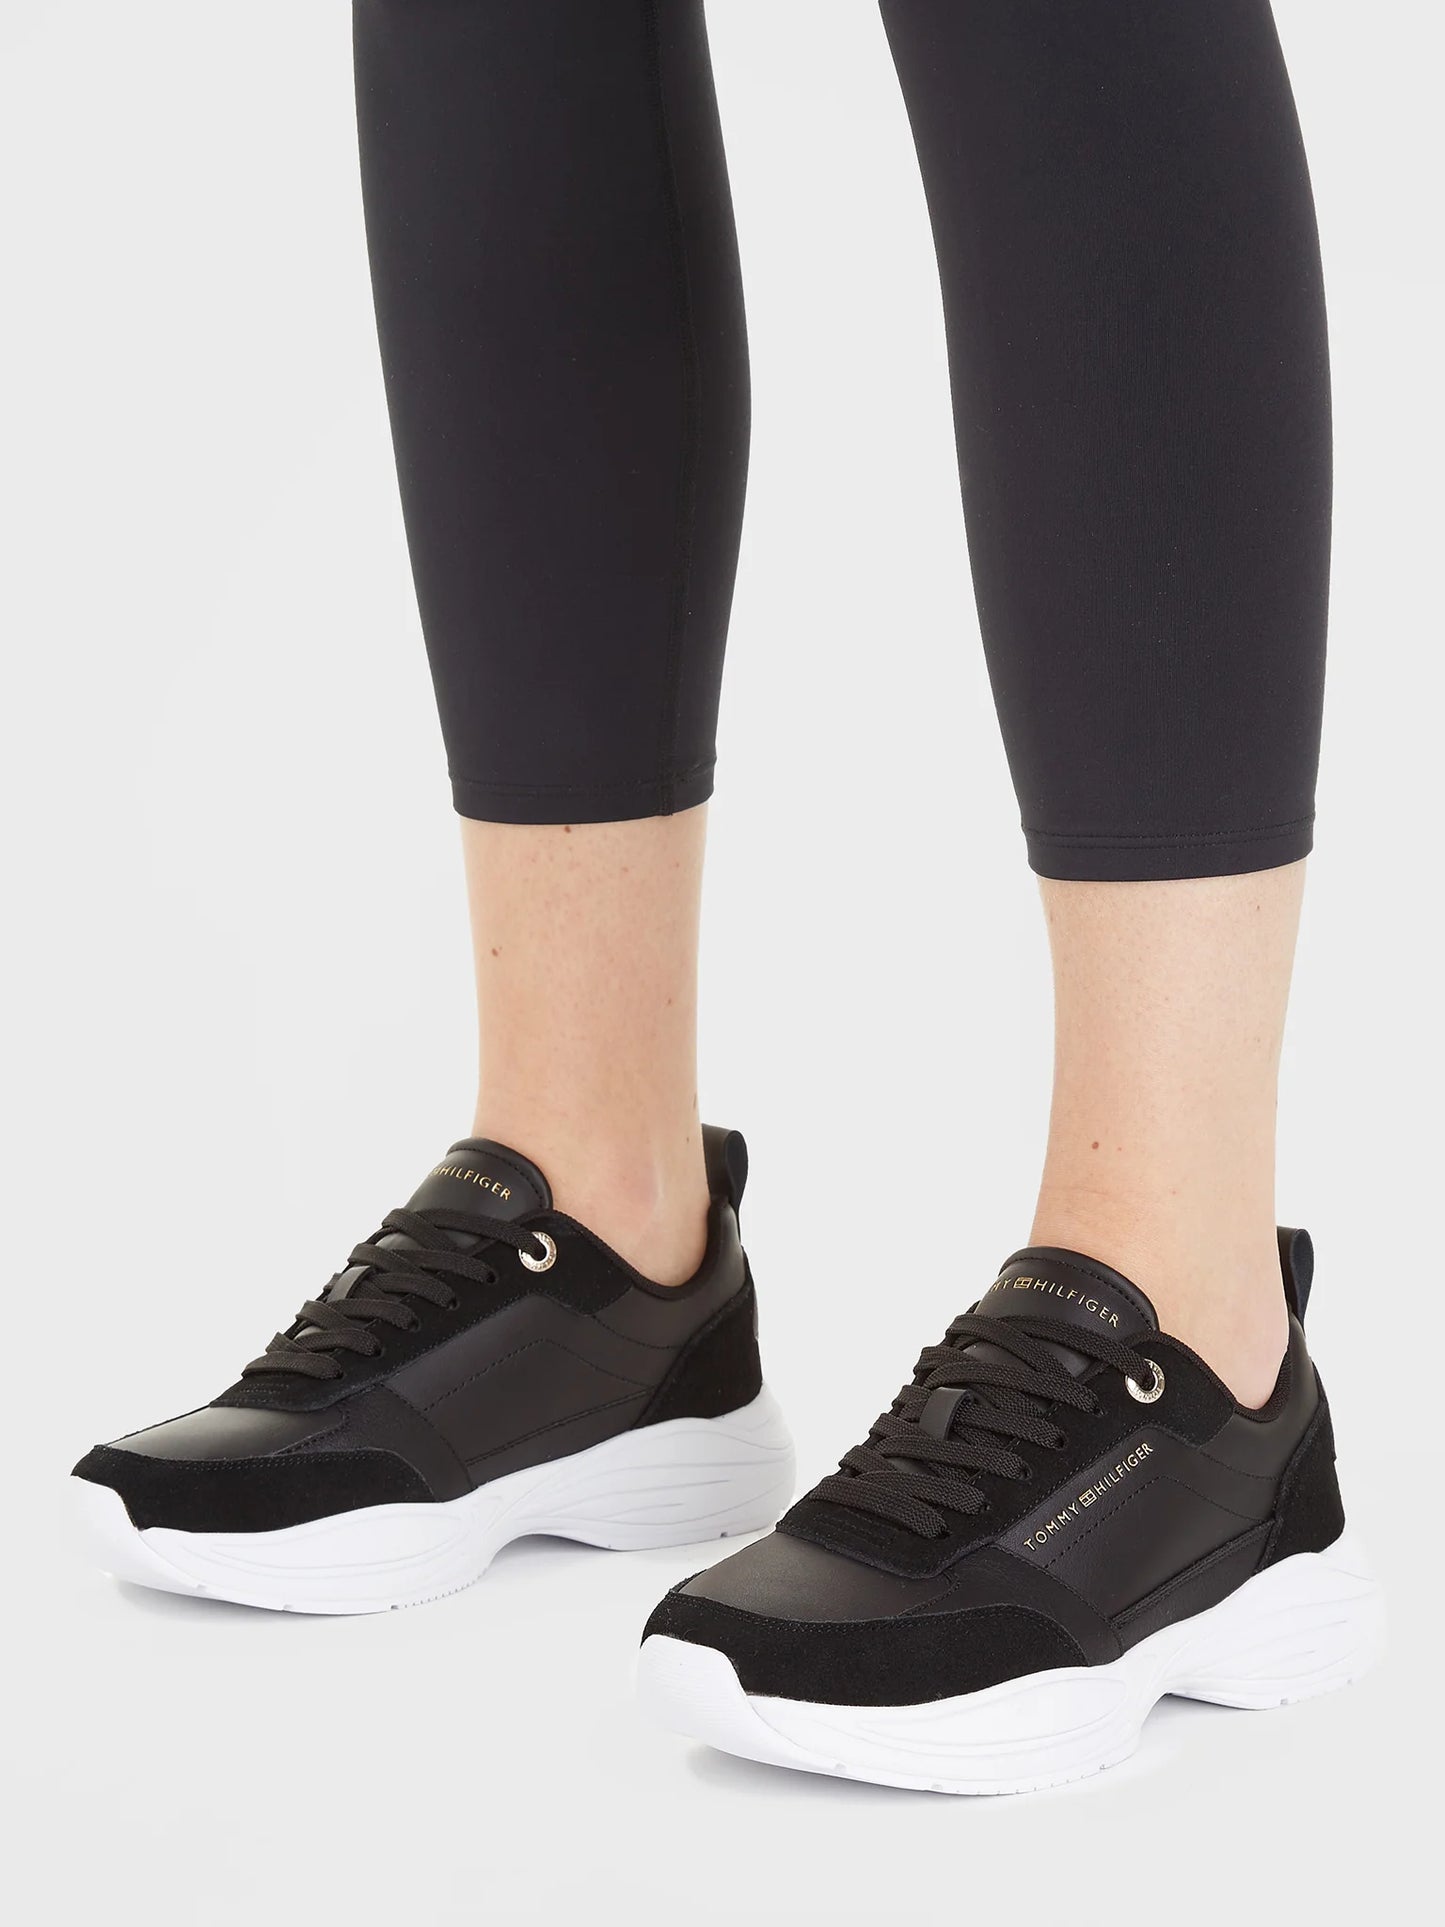 Tommy Hilfiger Black Casual Shoes for Women